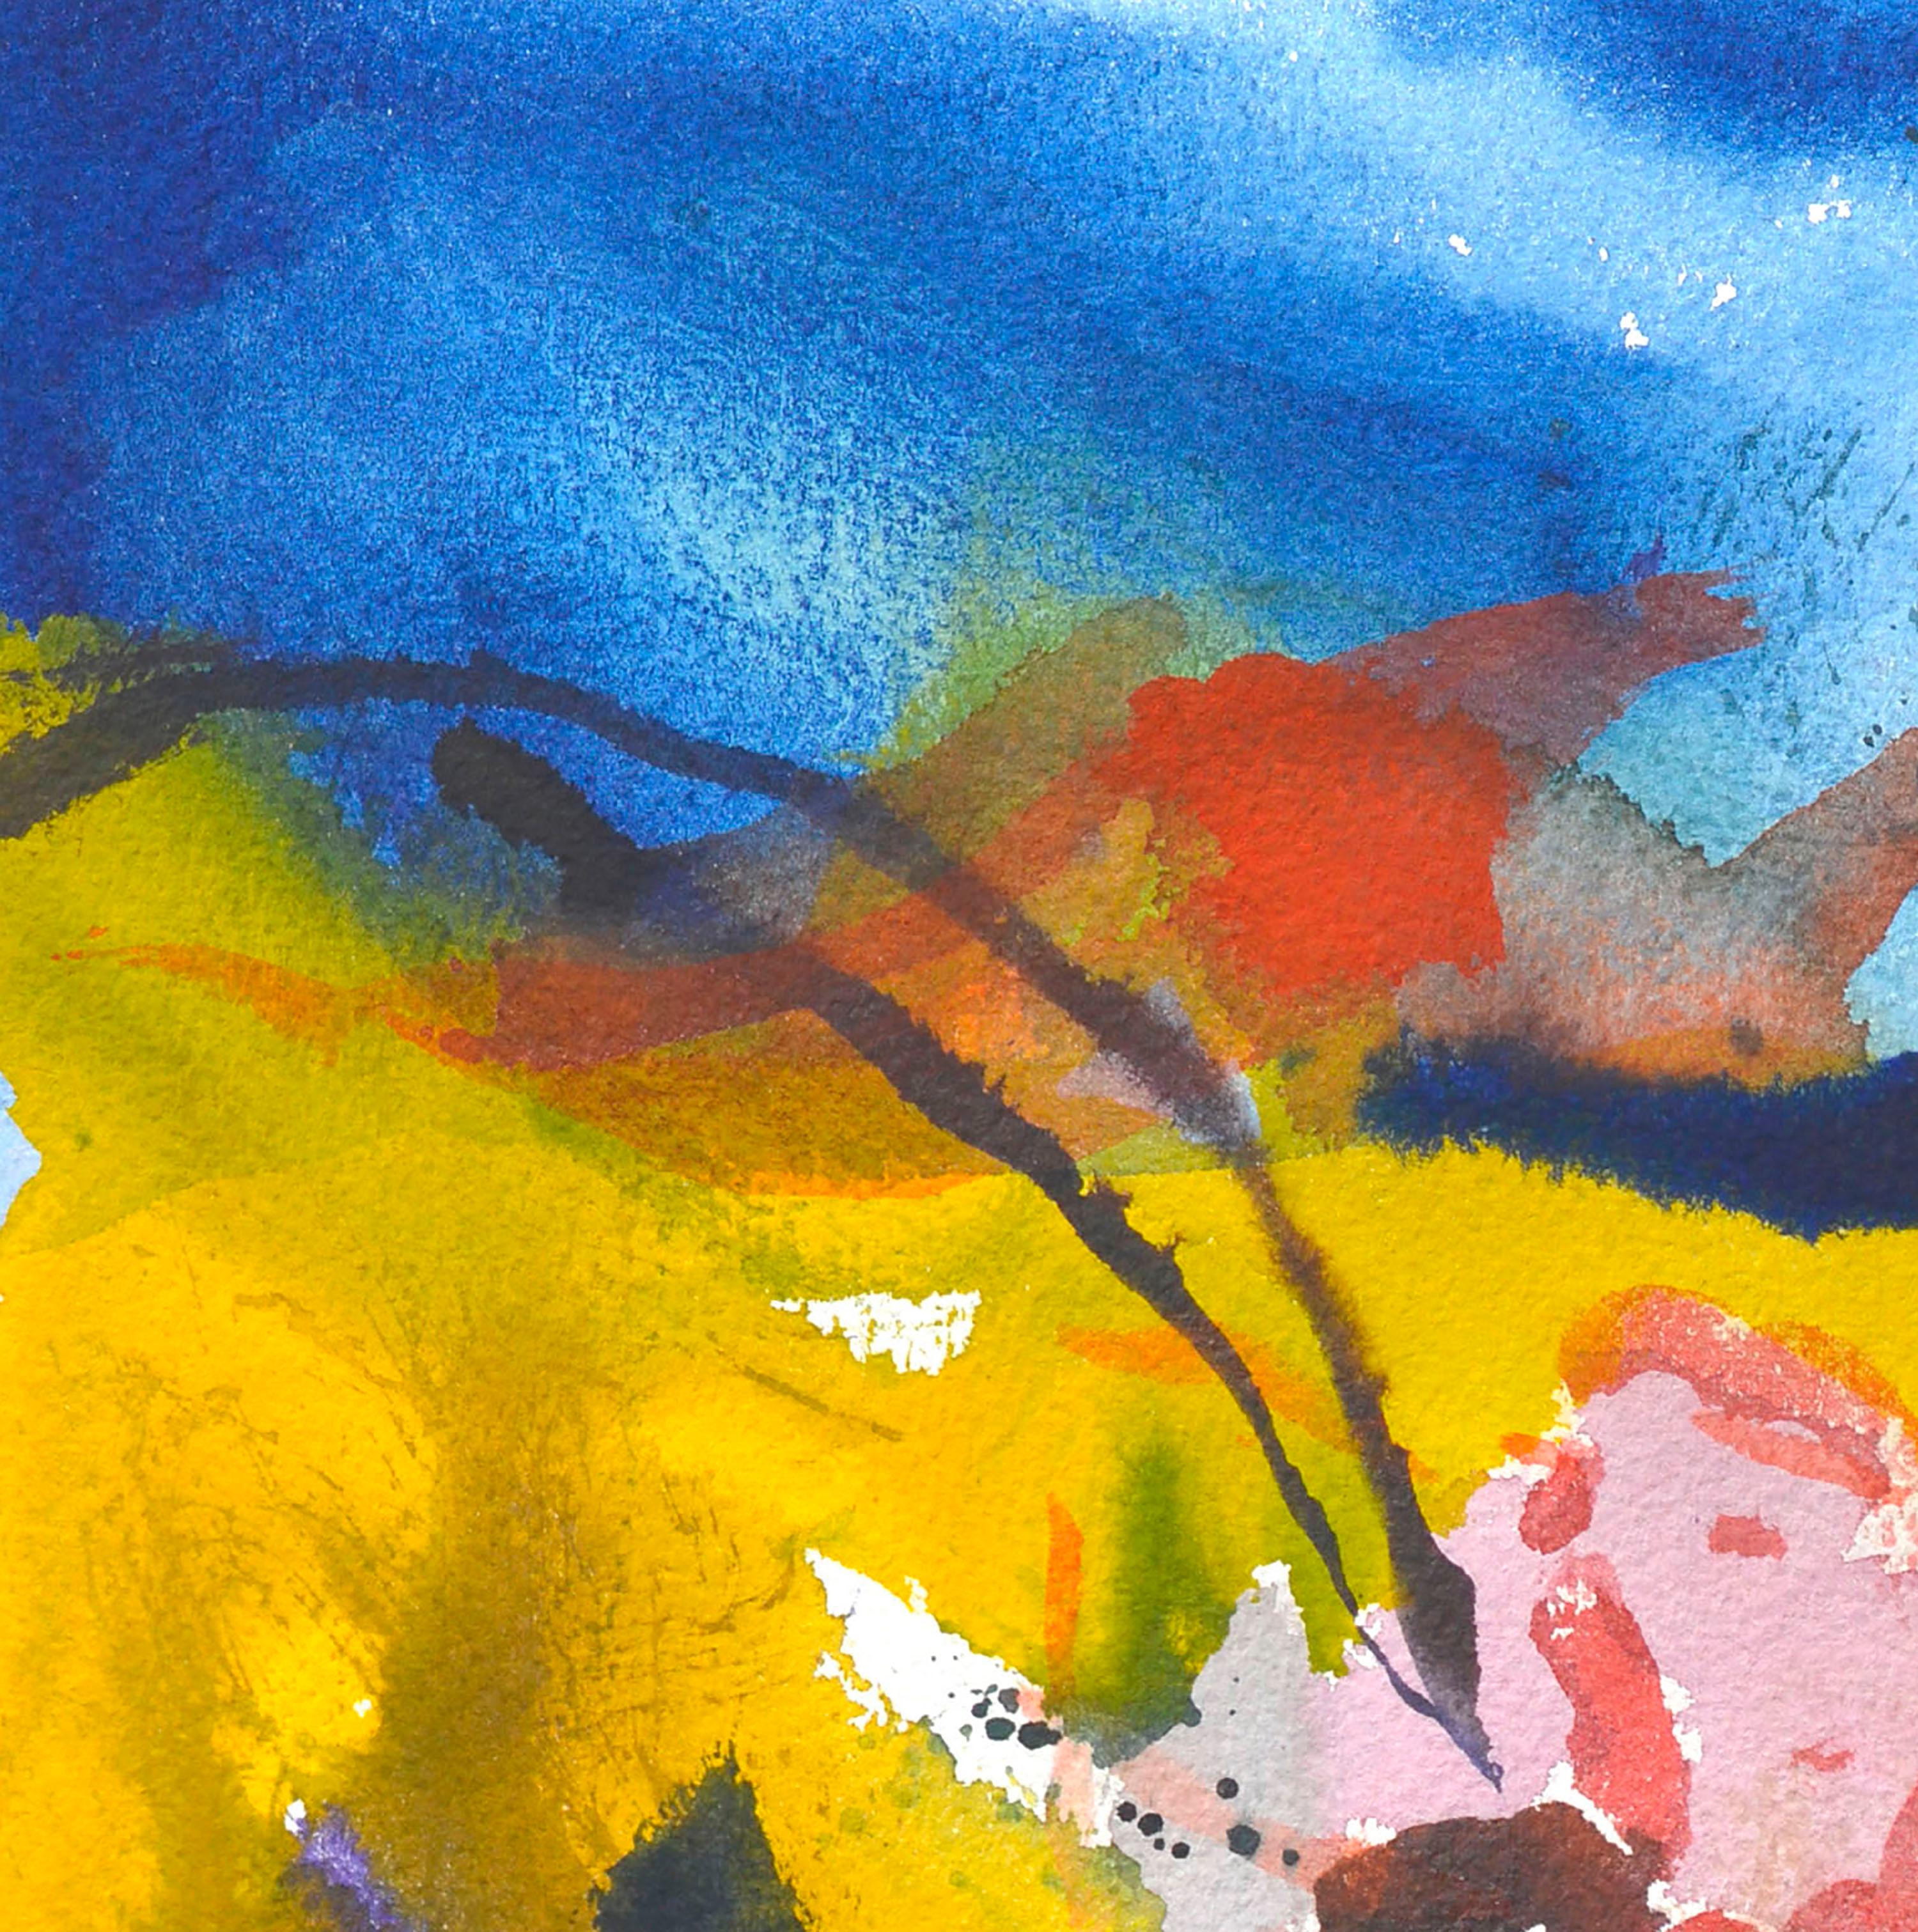 Colorful Abstract Watercolor - Abstract Expressionist Art by Les Anderson